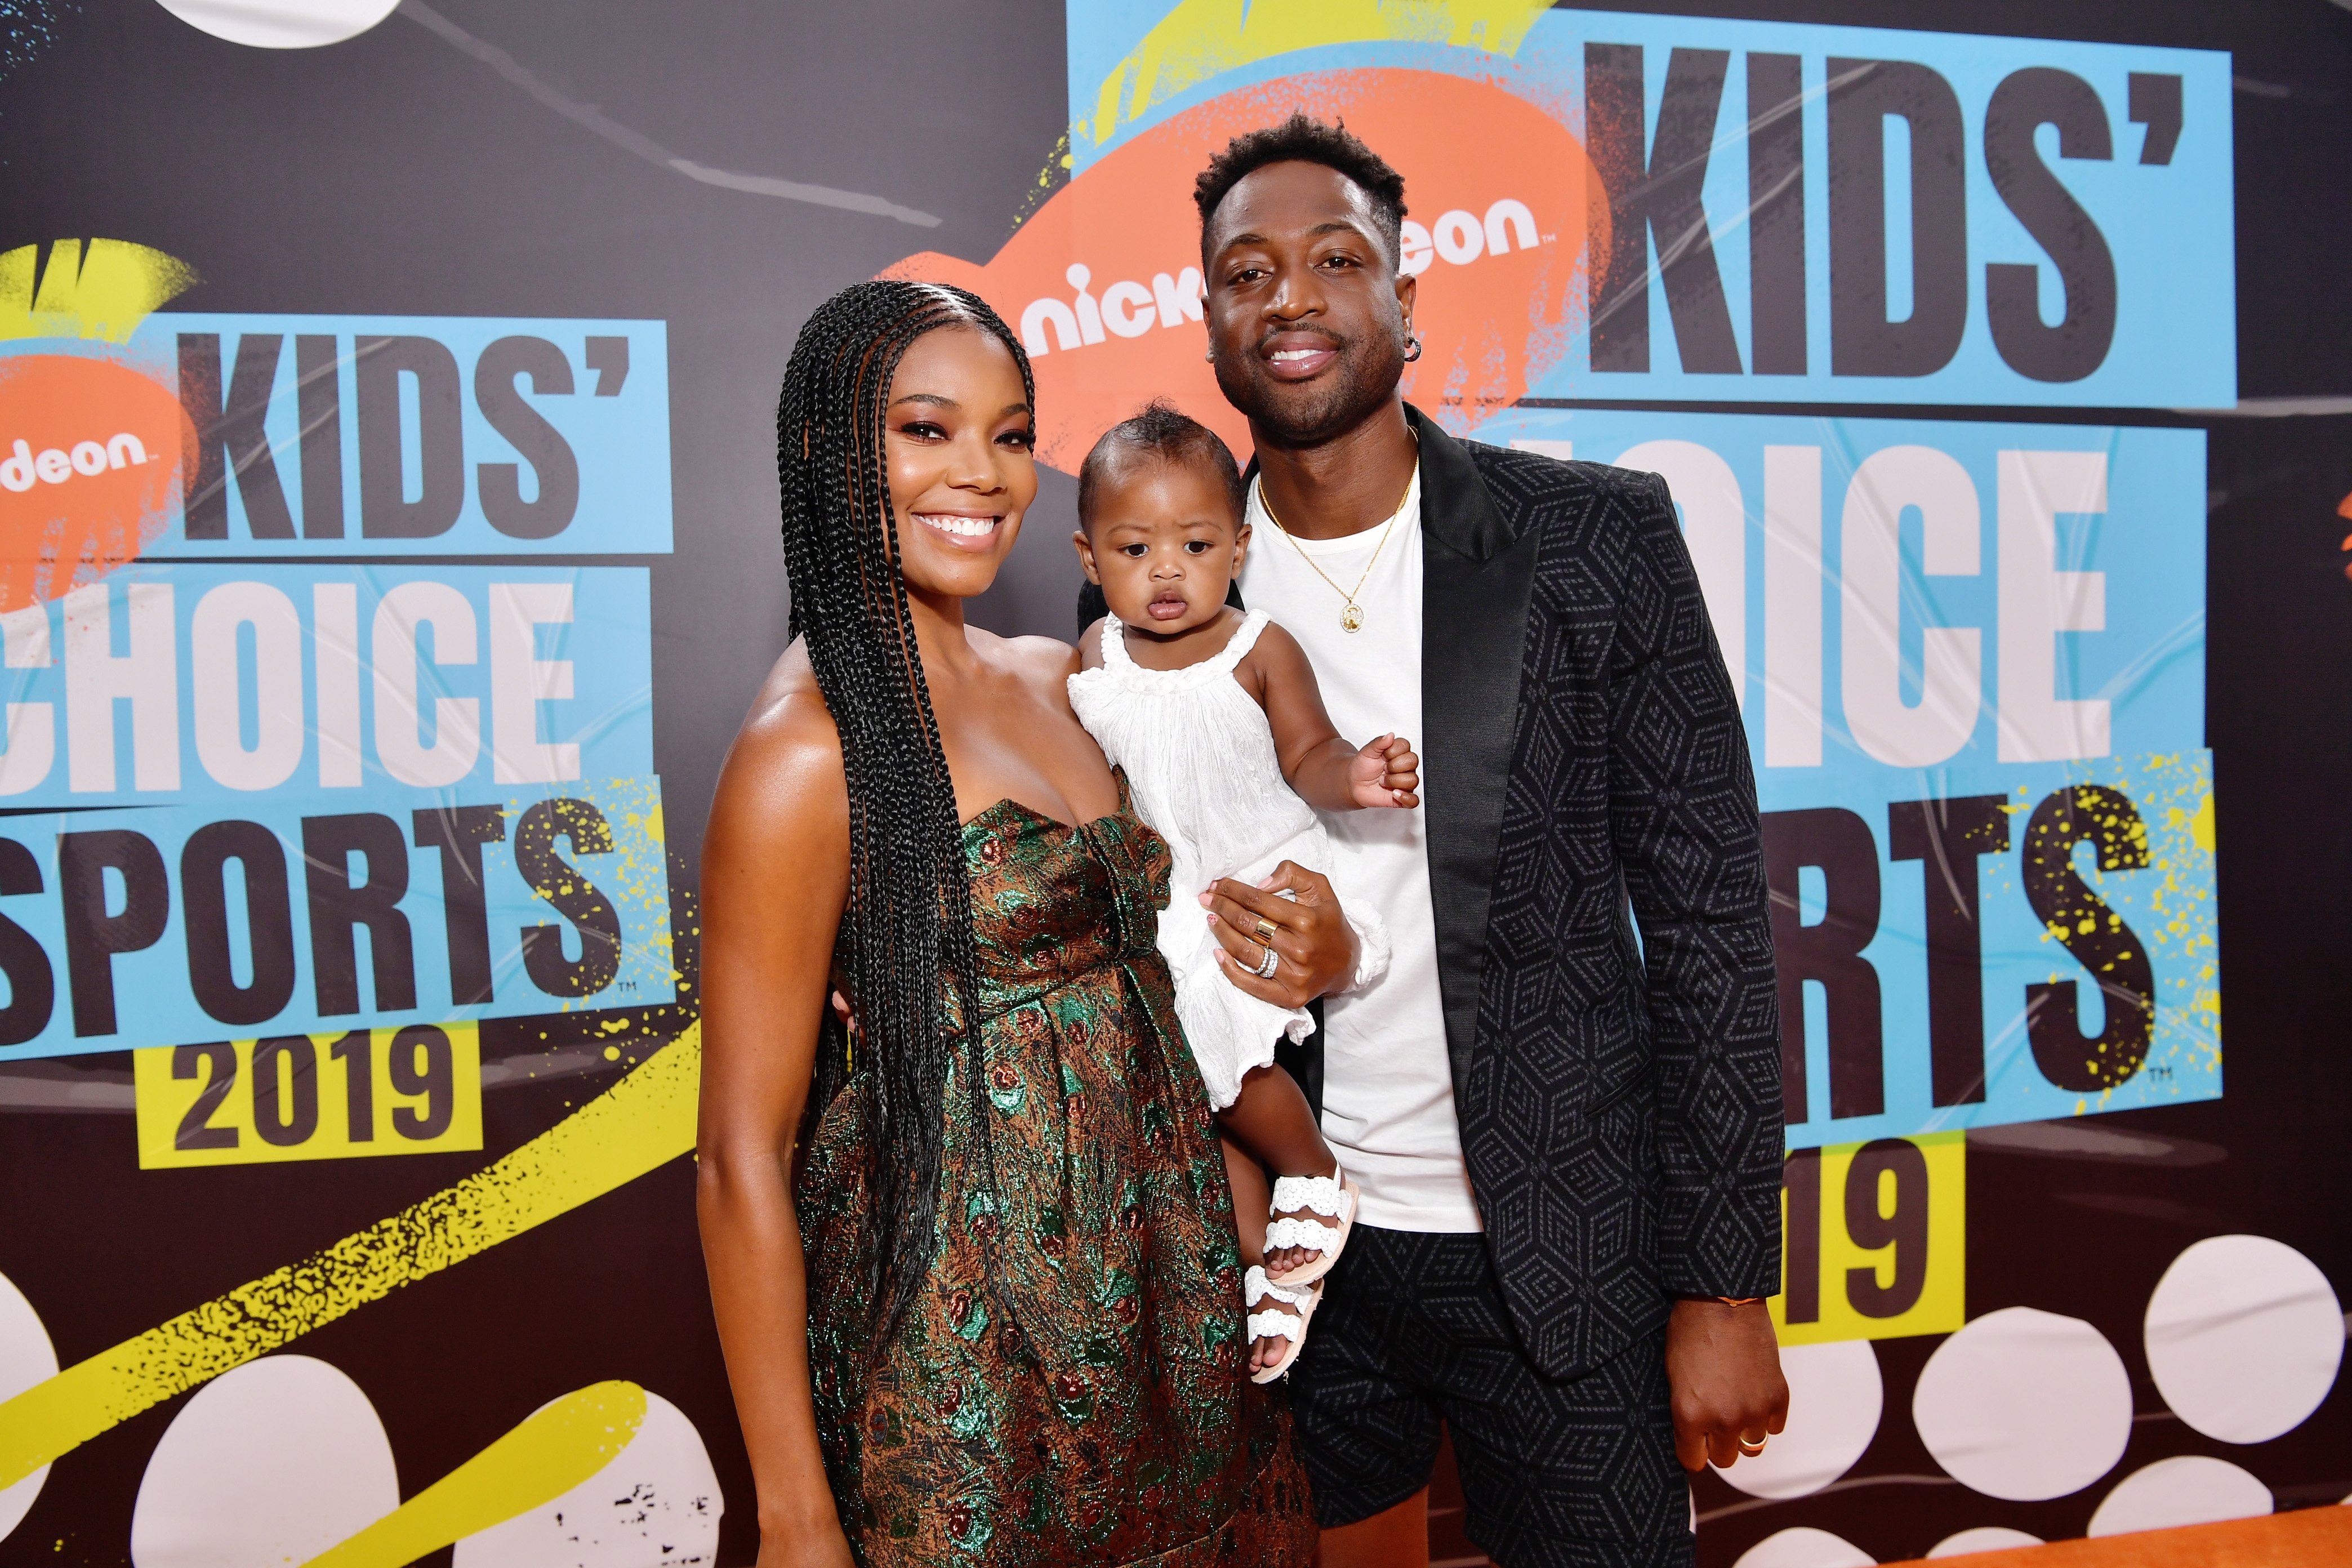 Gabrielle Union and Dwyane Wade attend Nickelodeon Kids' Choice Sports 2019 on July 11, 2019, in Santa Monica, California. | Source: Getty Images.